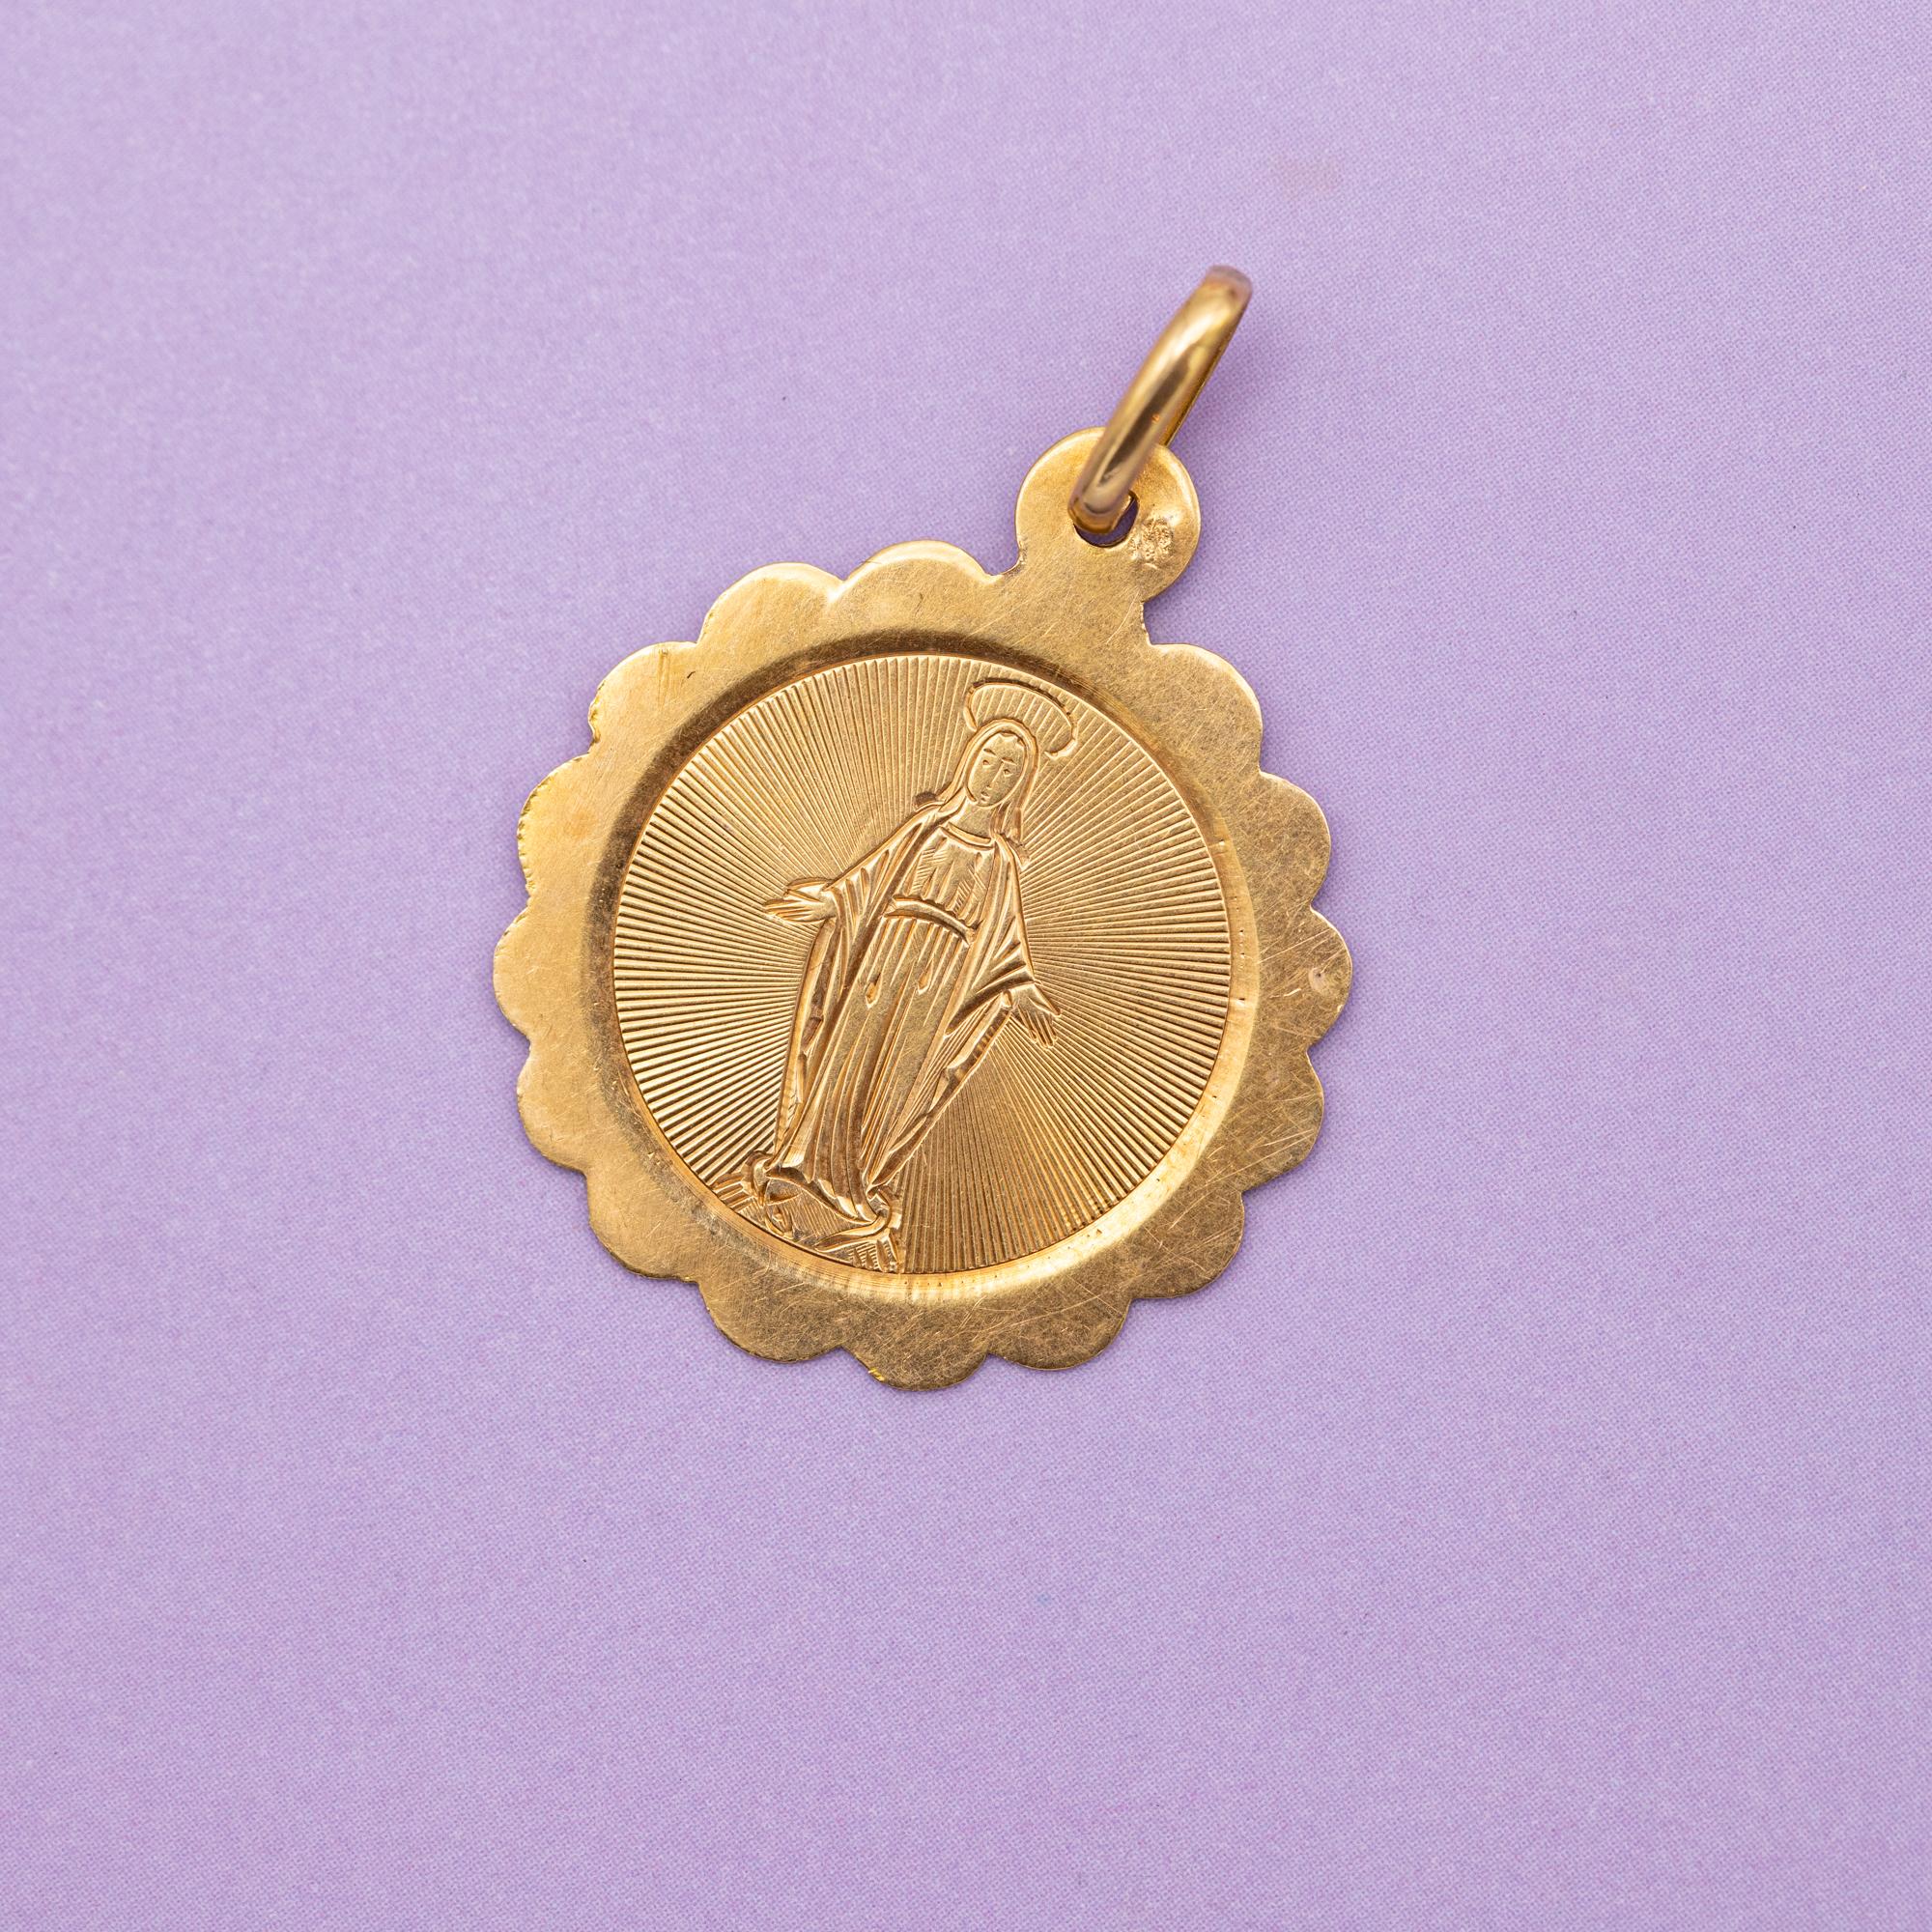 For sale is this stunning hand engraved mother Mary charm. This round charm depicts a lovely hand engraved Virgin Mary in front of a sunburst background. This Antique protecting medallion is crafted in 18 ct gold and has a bright and warm look. The